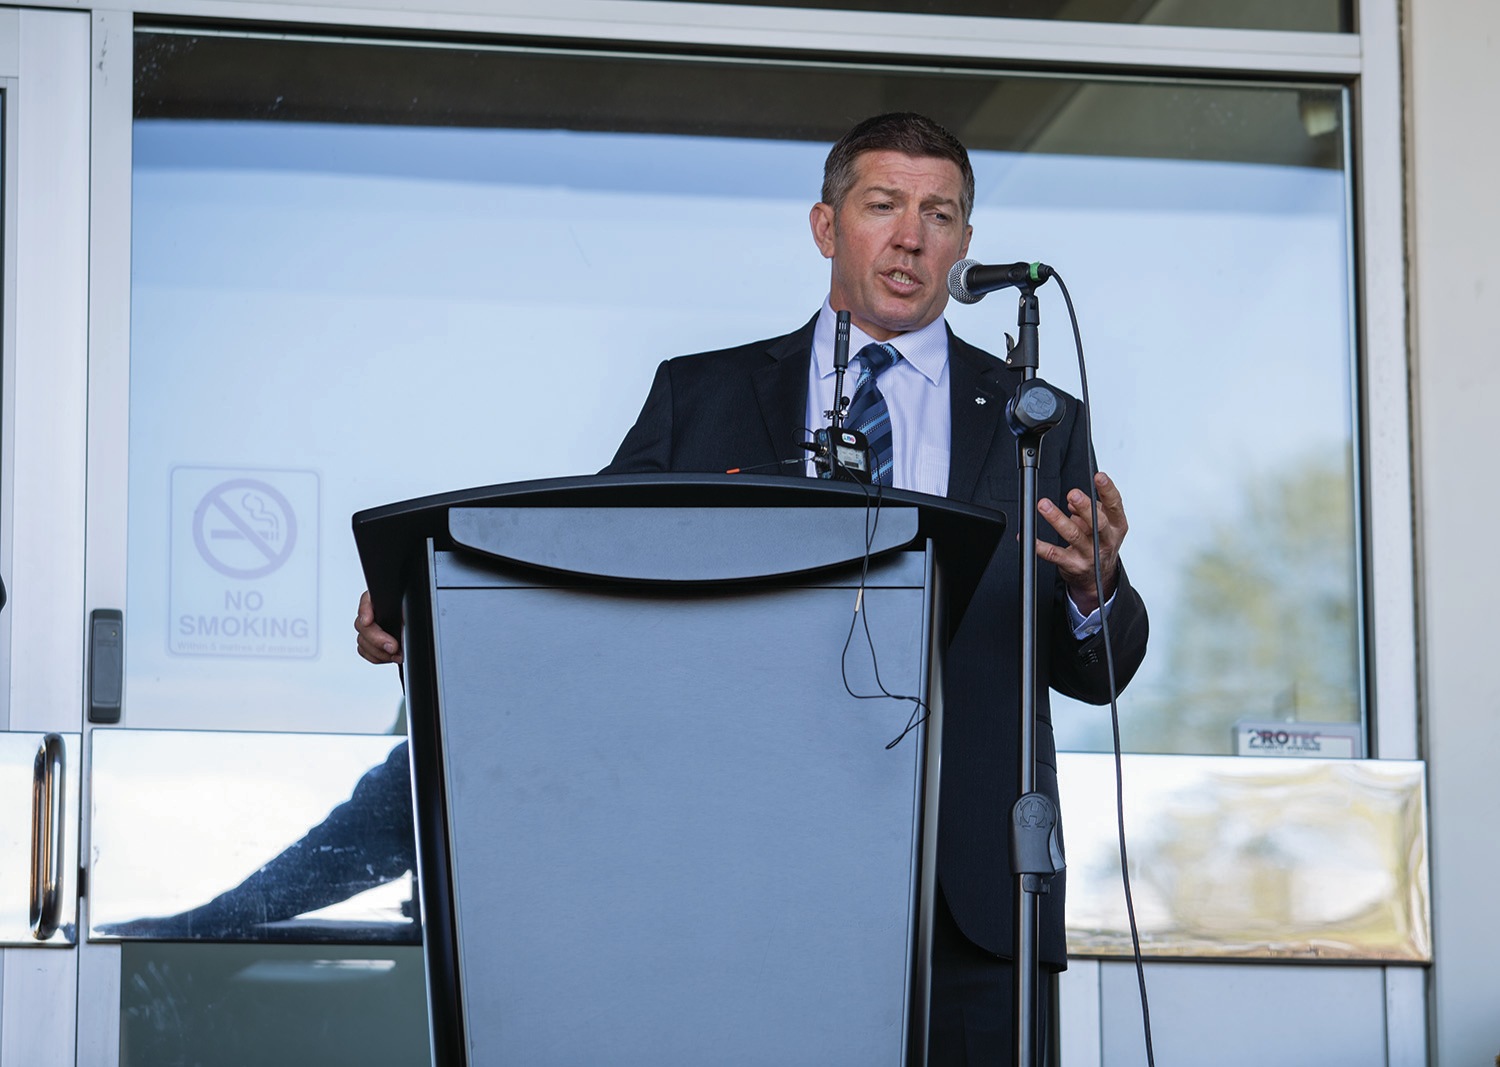 BIG ANNOUNCEMENT - Former NHL player Sheldon Kennedy spoke at a press conference held at City Hall announcing the new Central Alberta Child Advocacy Centre for Red Deer.